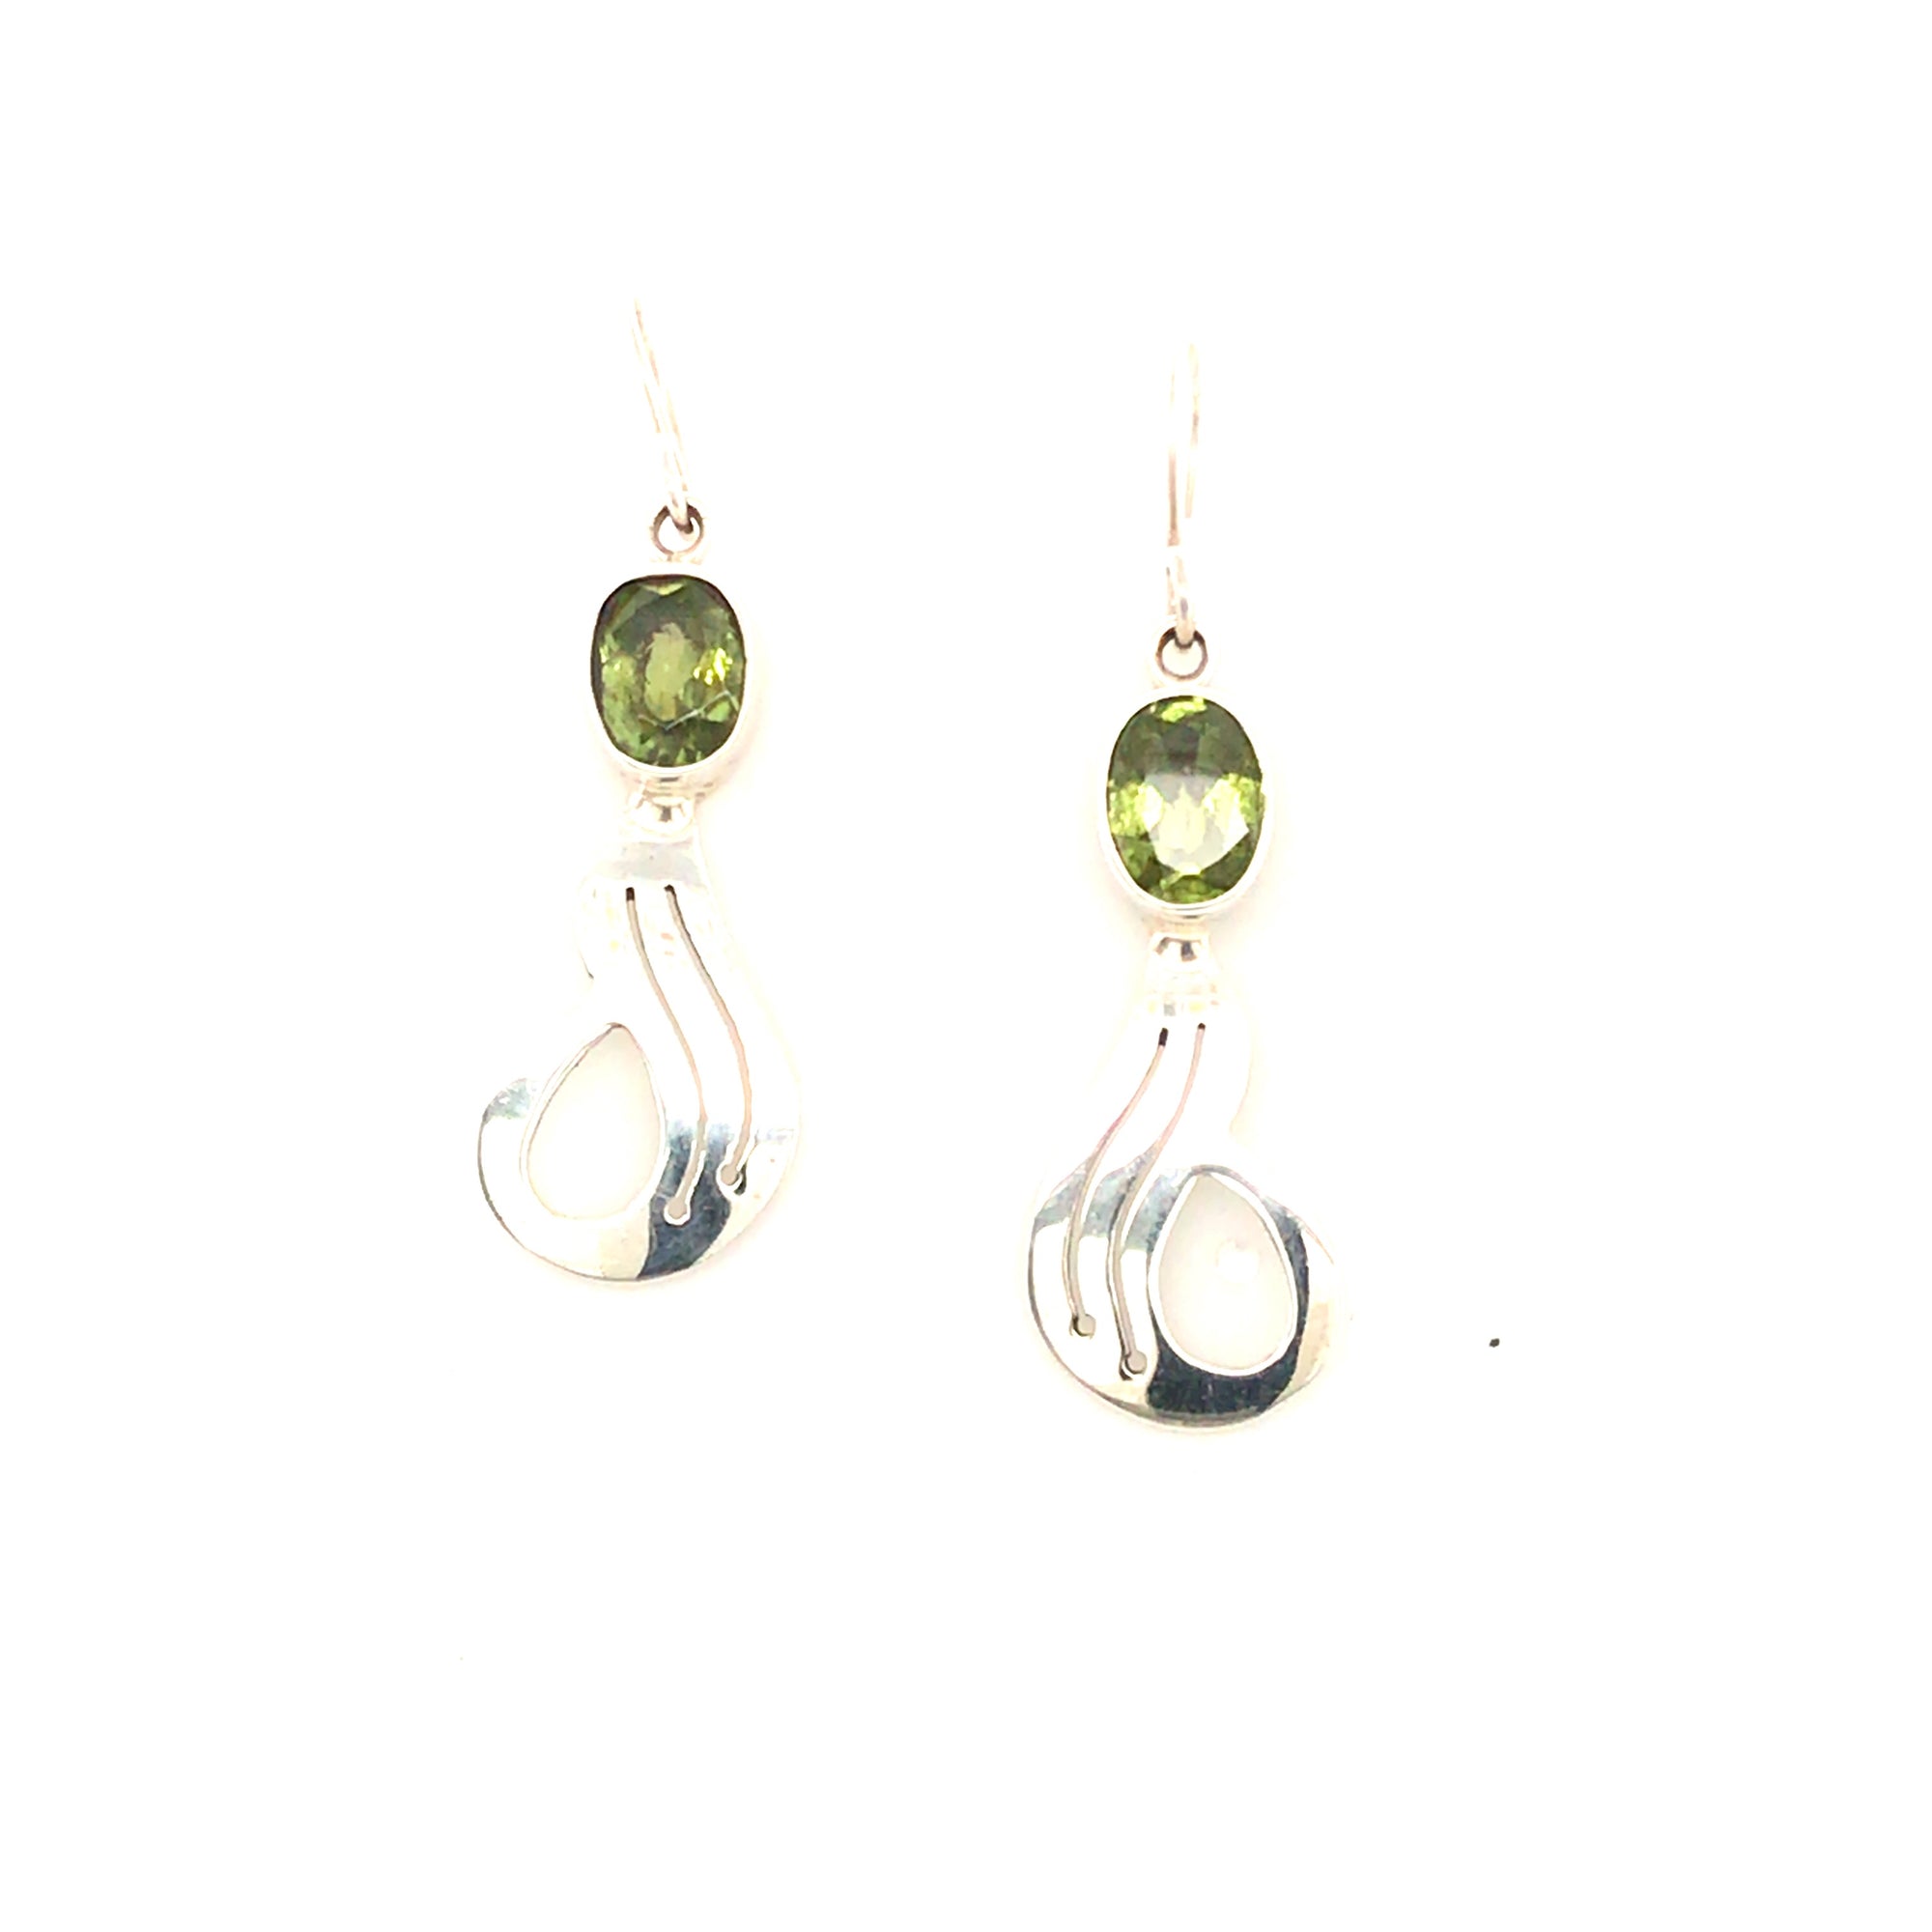 Sterling silver earrings with faceted peridot